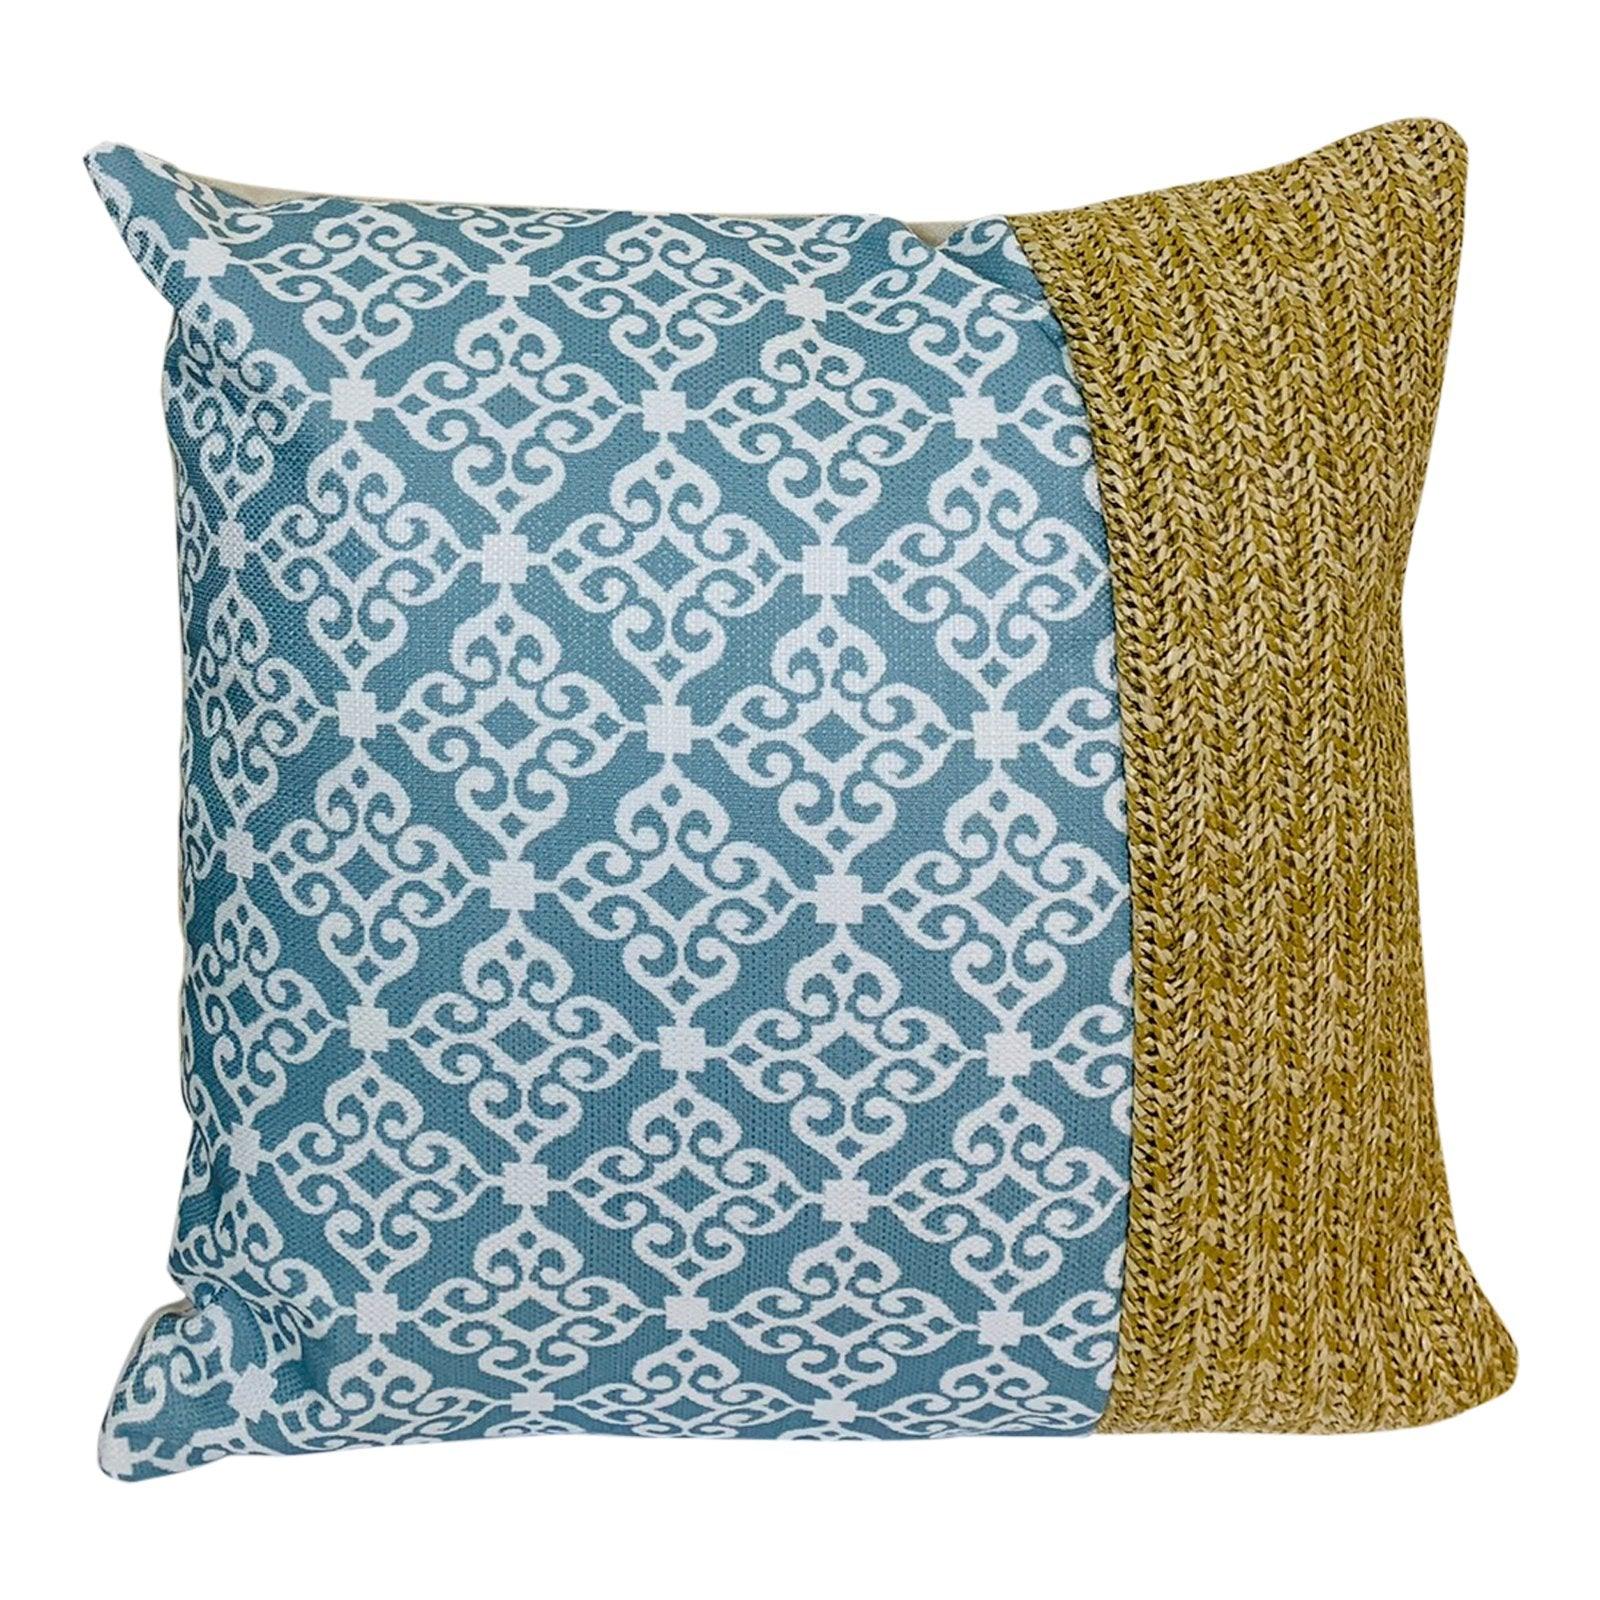 View Serenity Print Square Cushion Blue information